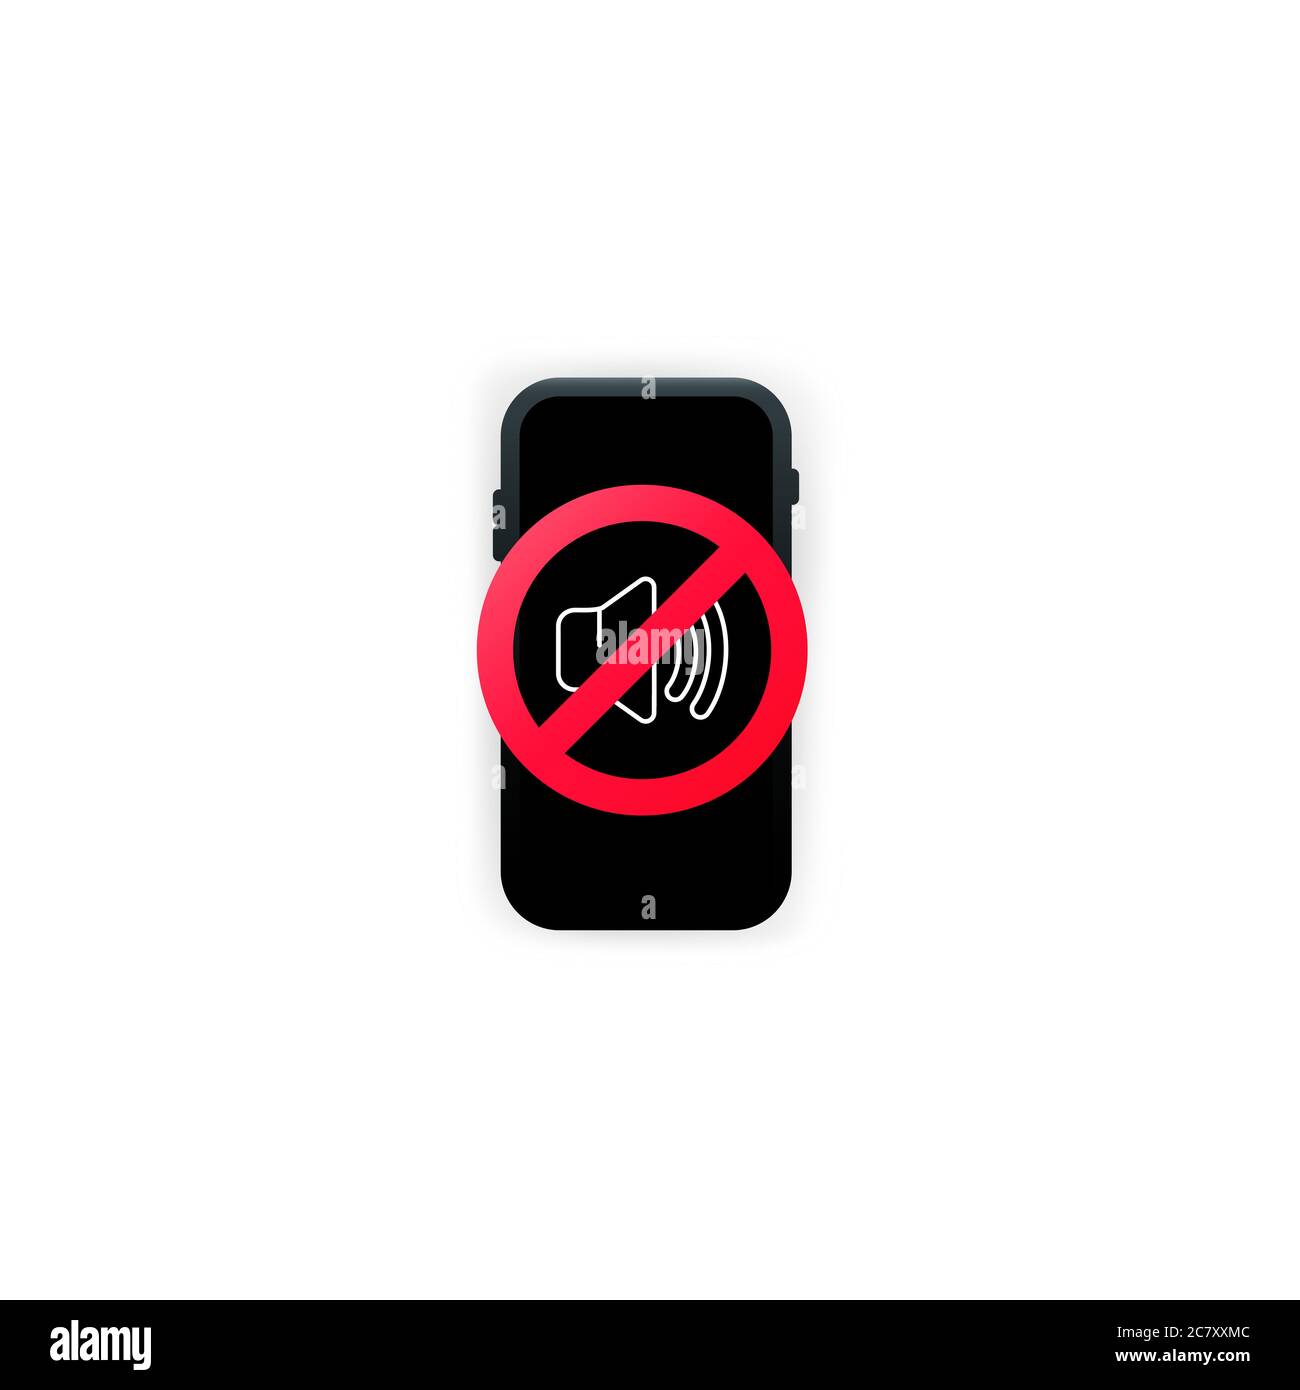 Phone Mute Icon High Resolution Stock Photography and Images - Alamy